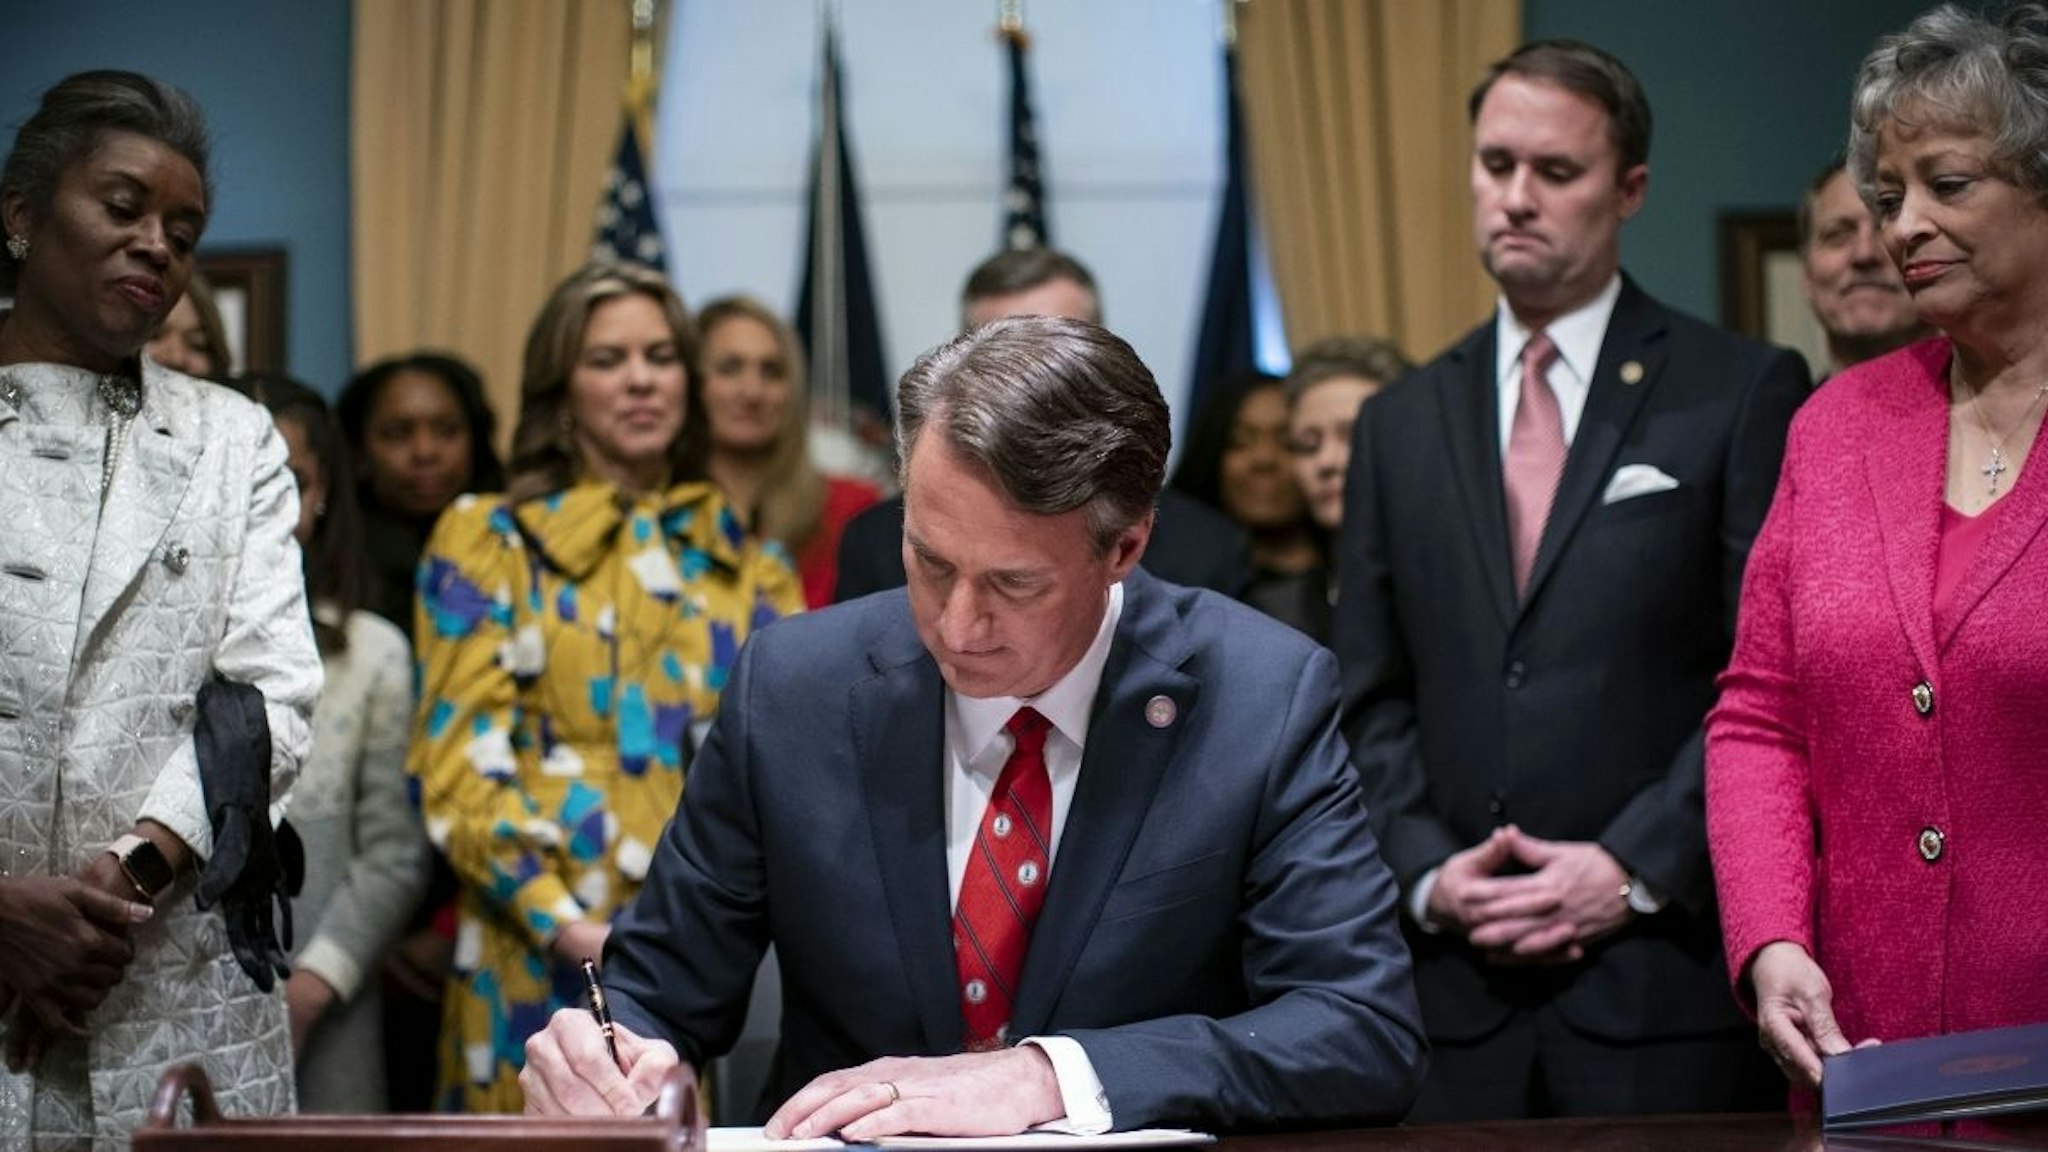 Glenn Youngkin, governor of Virginia, signs executive actions in the Virginia State Capitol in Richmond, Virginia, U.S., on Saturday, Jan. 15, 2022.